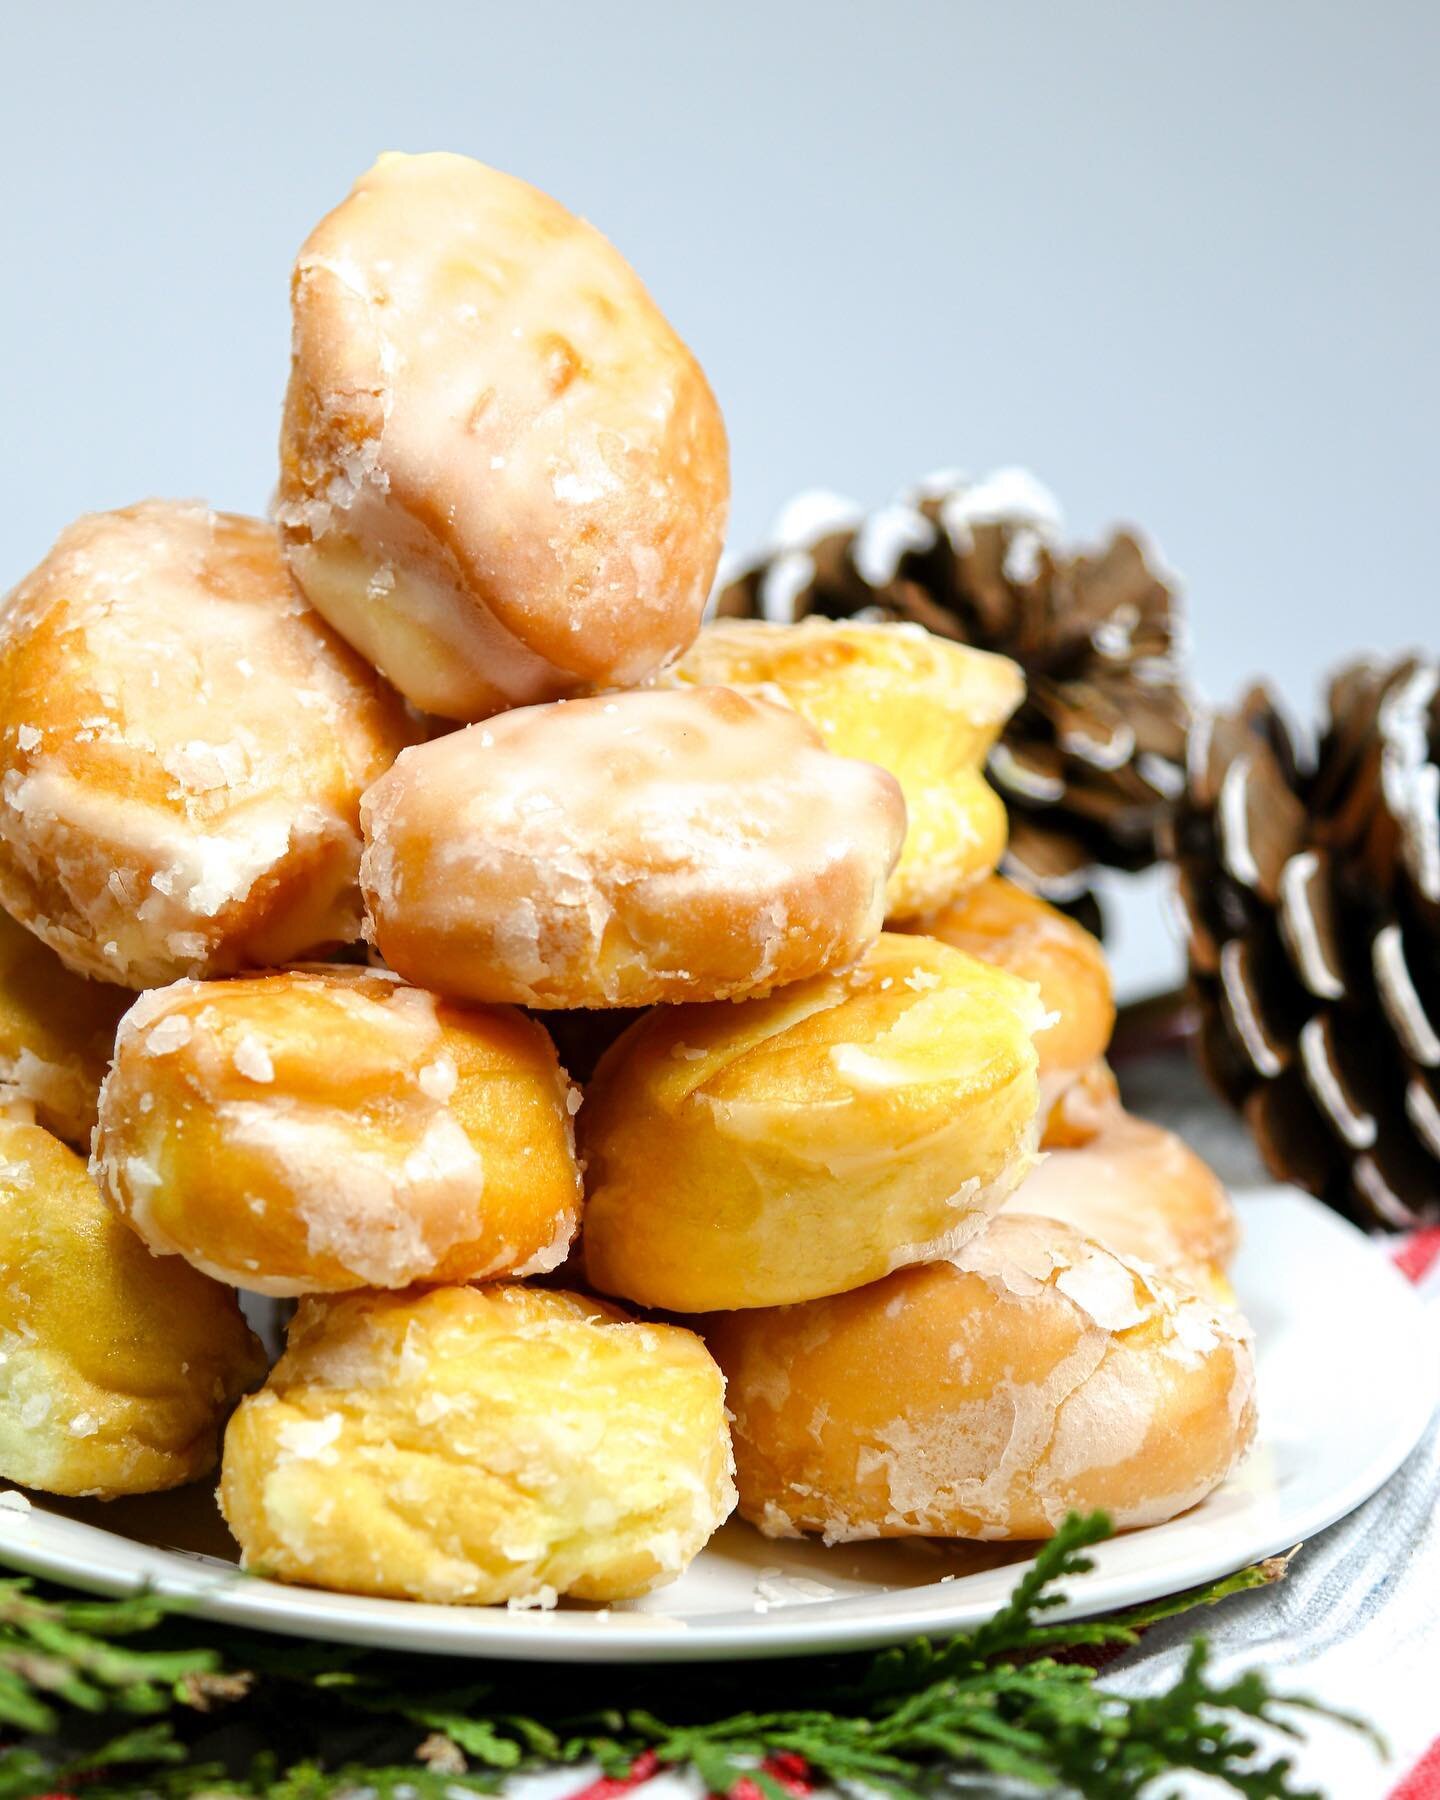 New Holiday Idea 🎄💡Order some of our donut holes and make your own #portunionbakery Croquembouche. Starting at 15 cents a piece to $1.50 per dozen! Order some today!